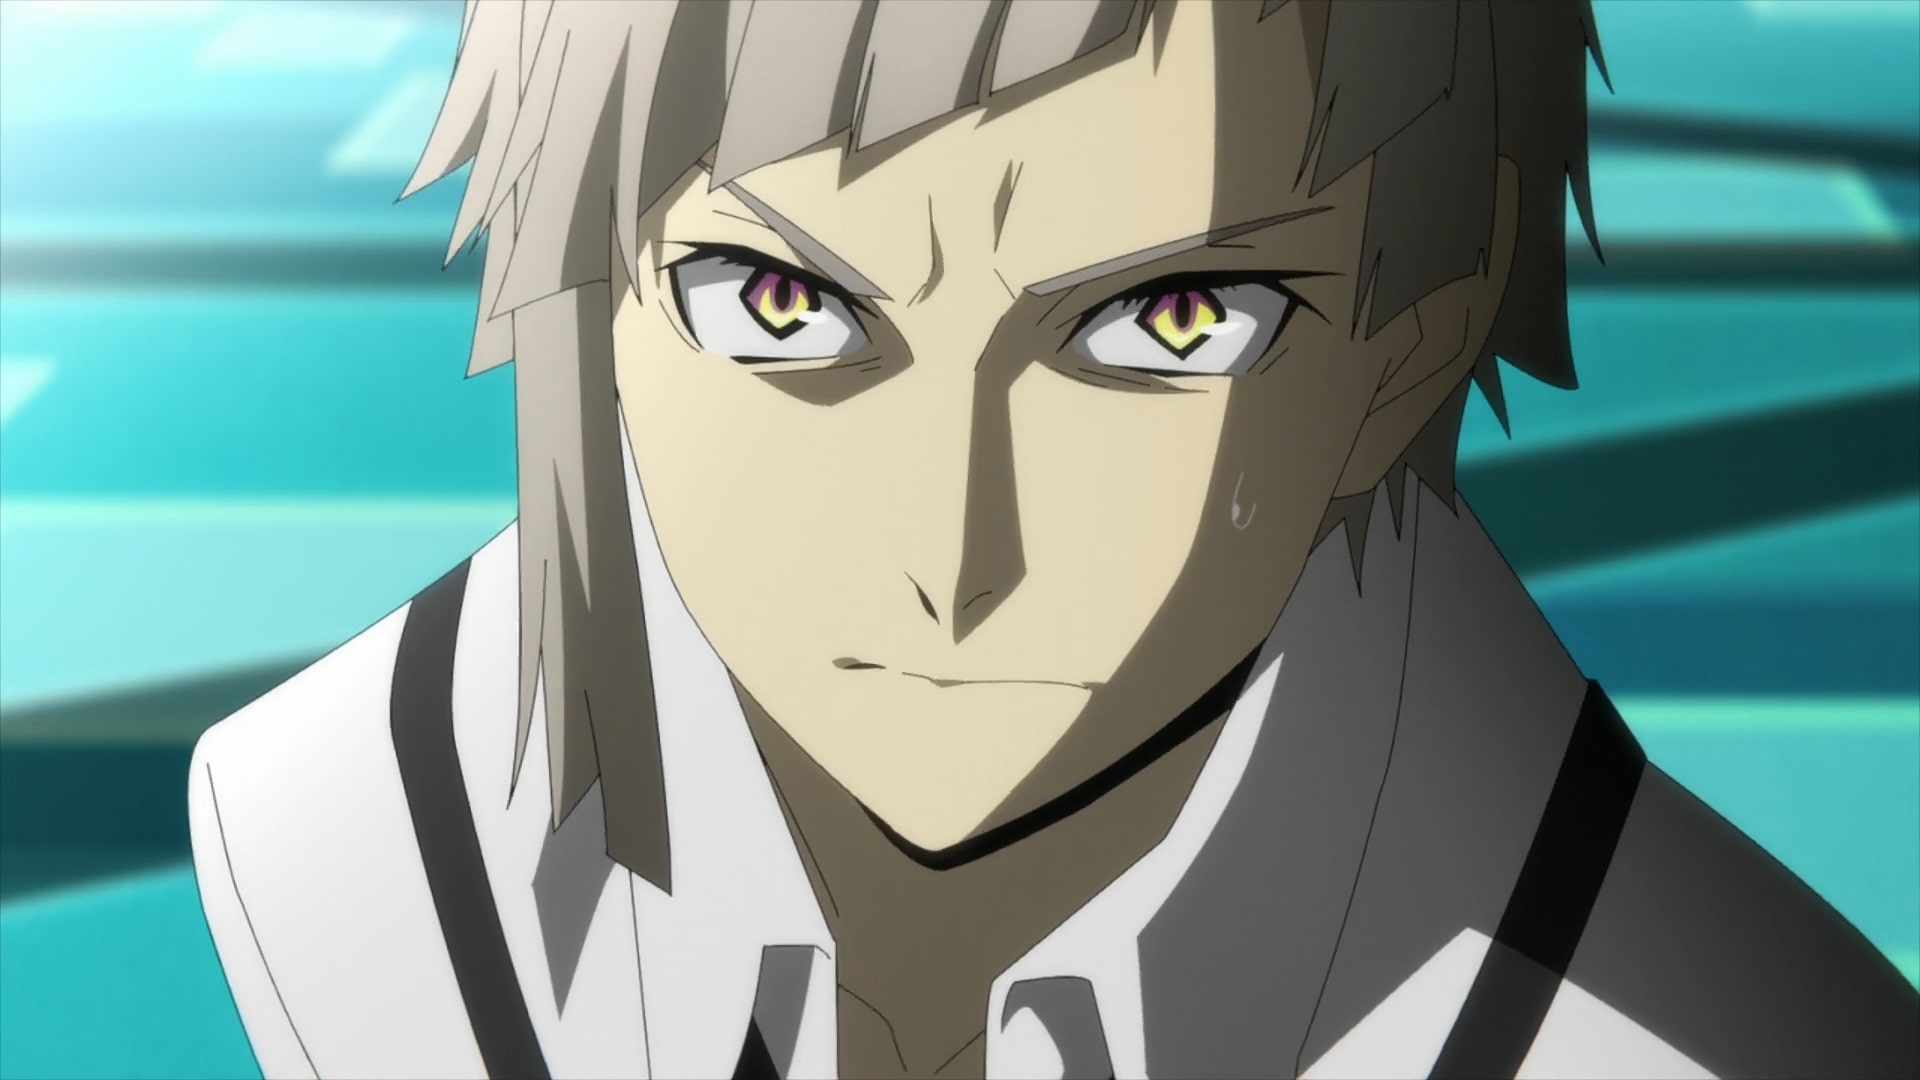 Bungo Stray Dogs Season 5 Episode 6 Release Date & Time